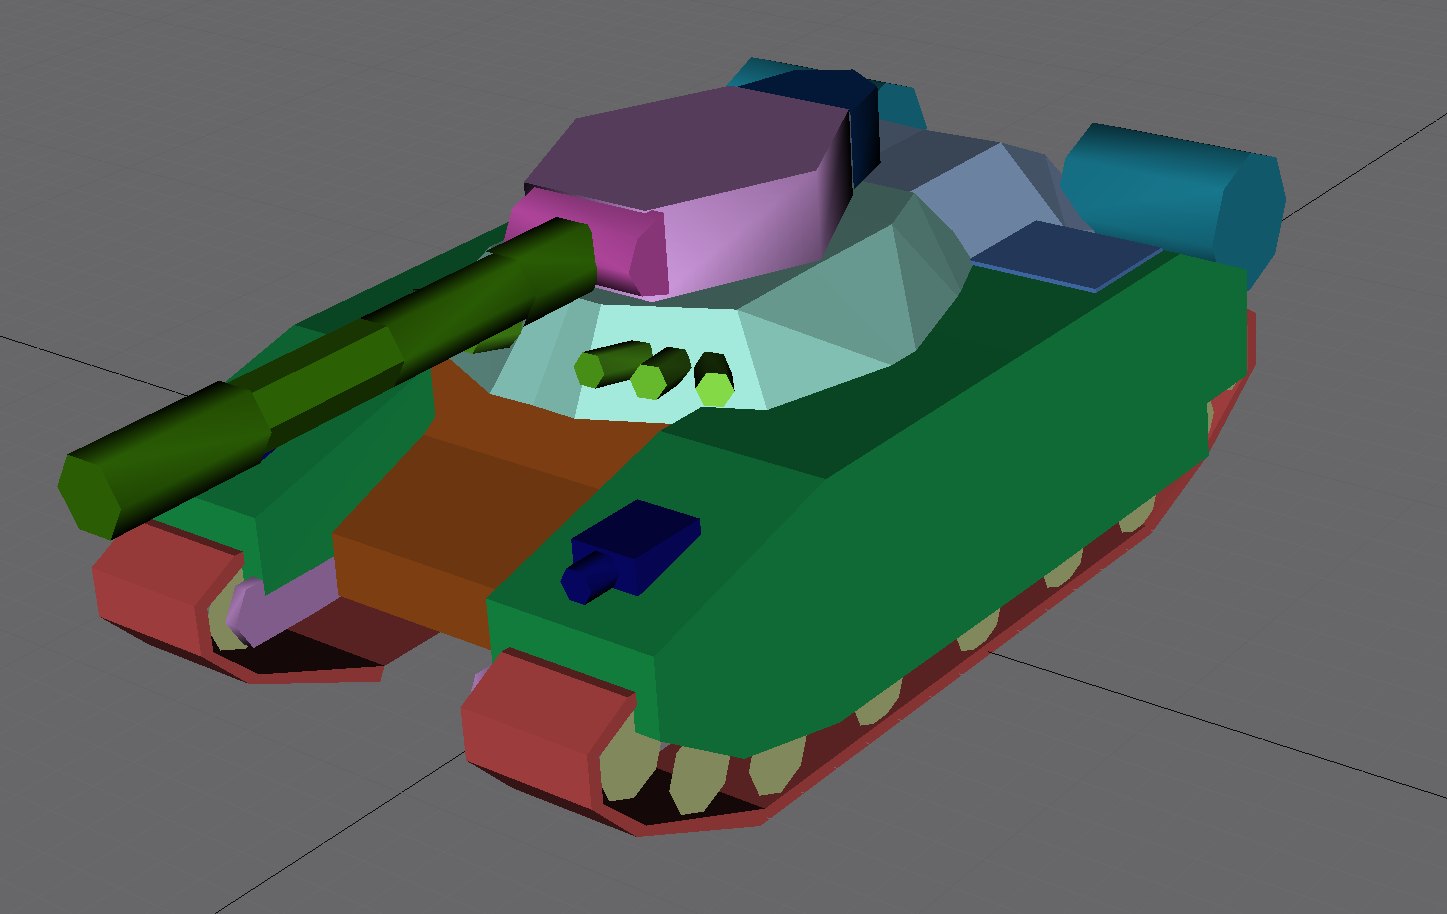 A pro tank, i'll submit it if its ready for the "Tank modelling contest" First try of full scale modelling and animation, i hope i do well, in my "Ina